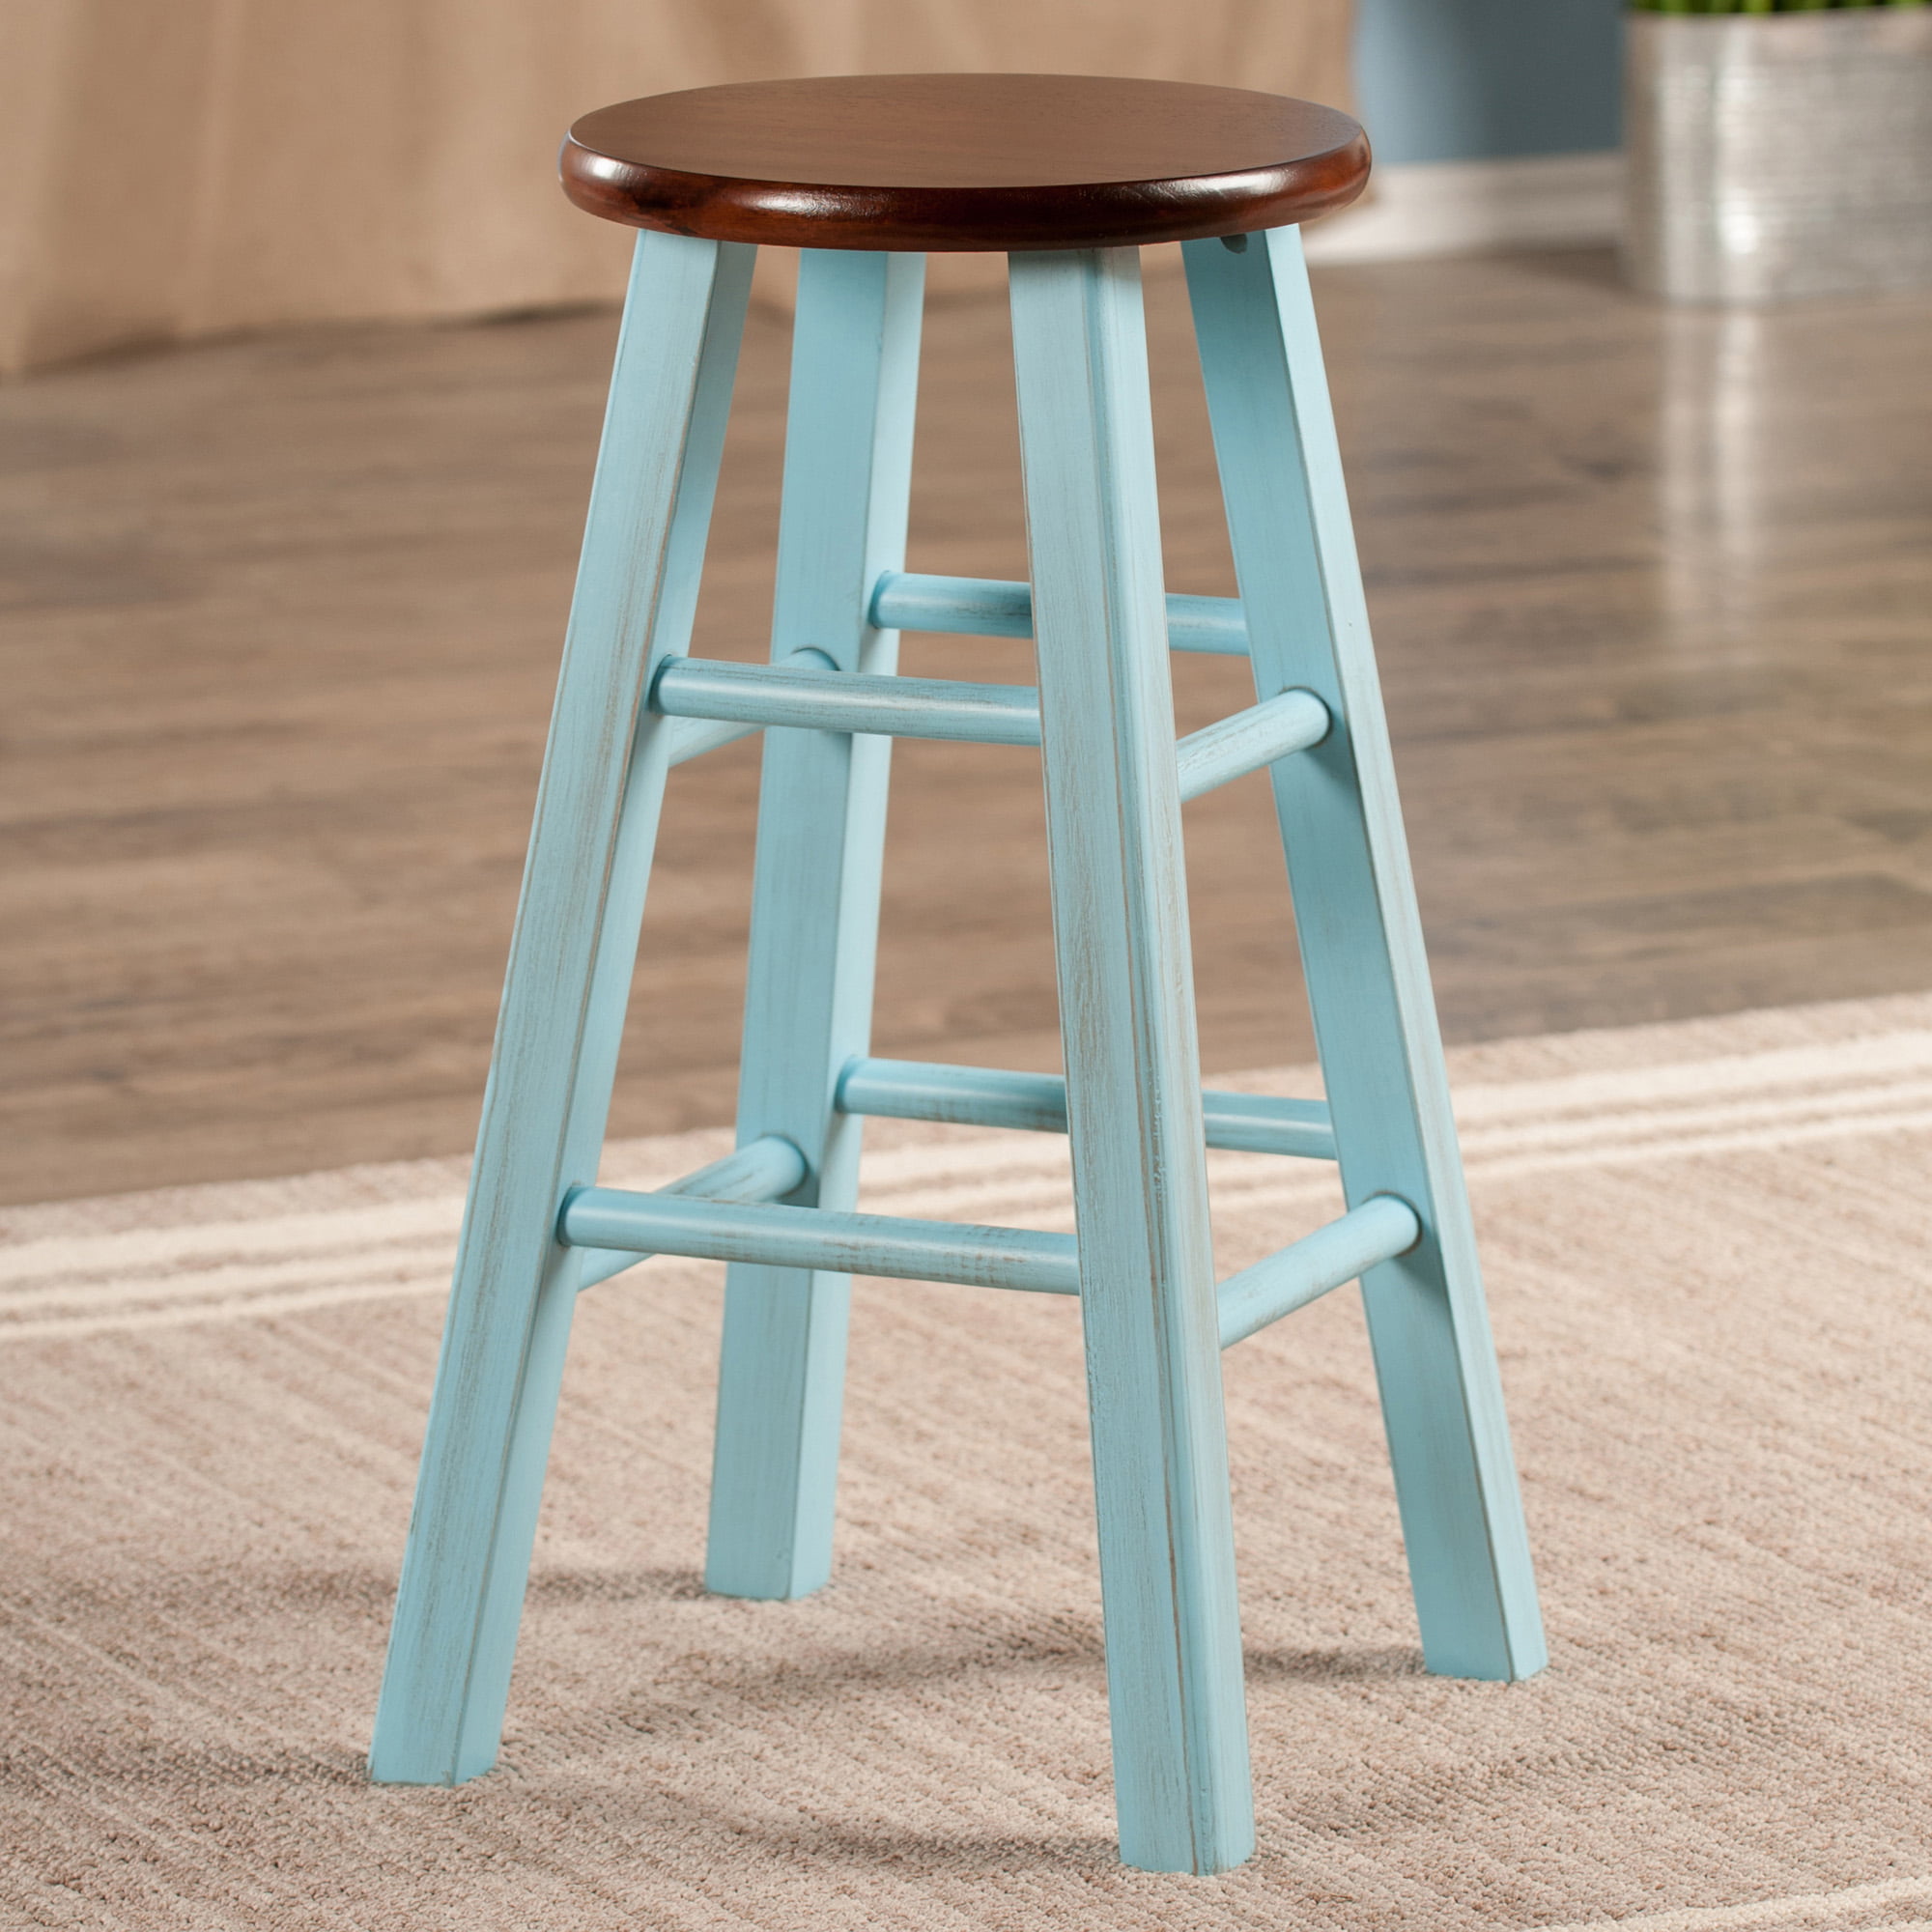 Winsome Wood Ivy 24" Counter Stool, Rustic Light Blue & Walnut Finish - image 4 of 6